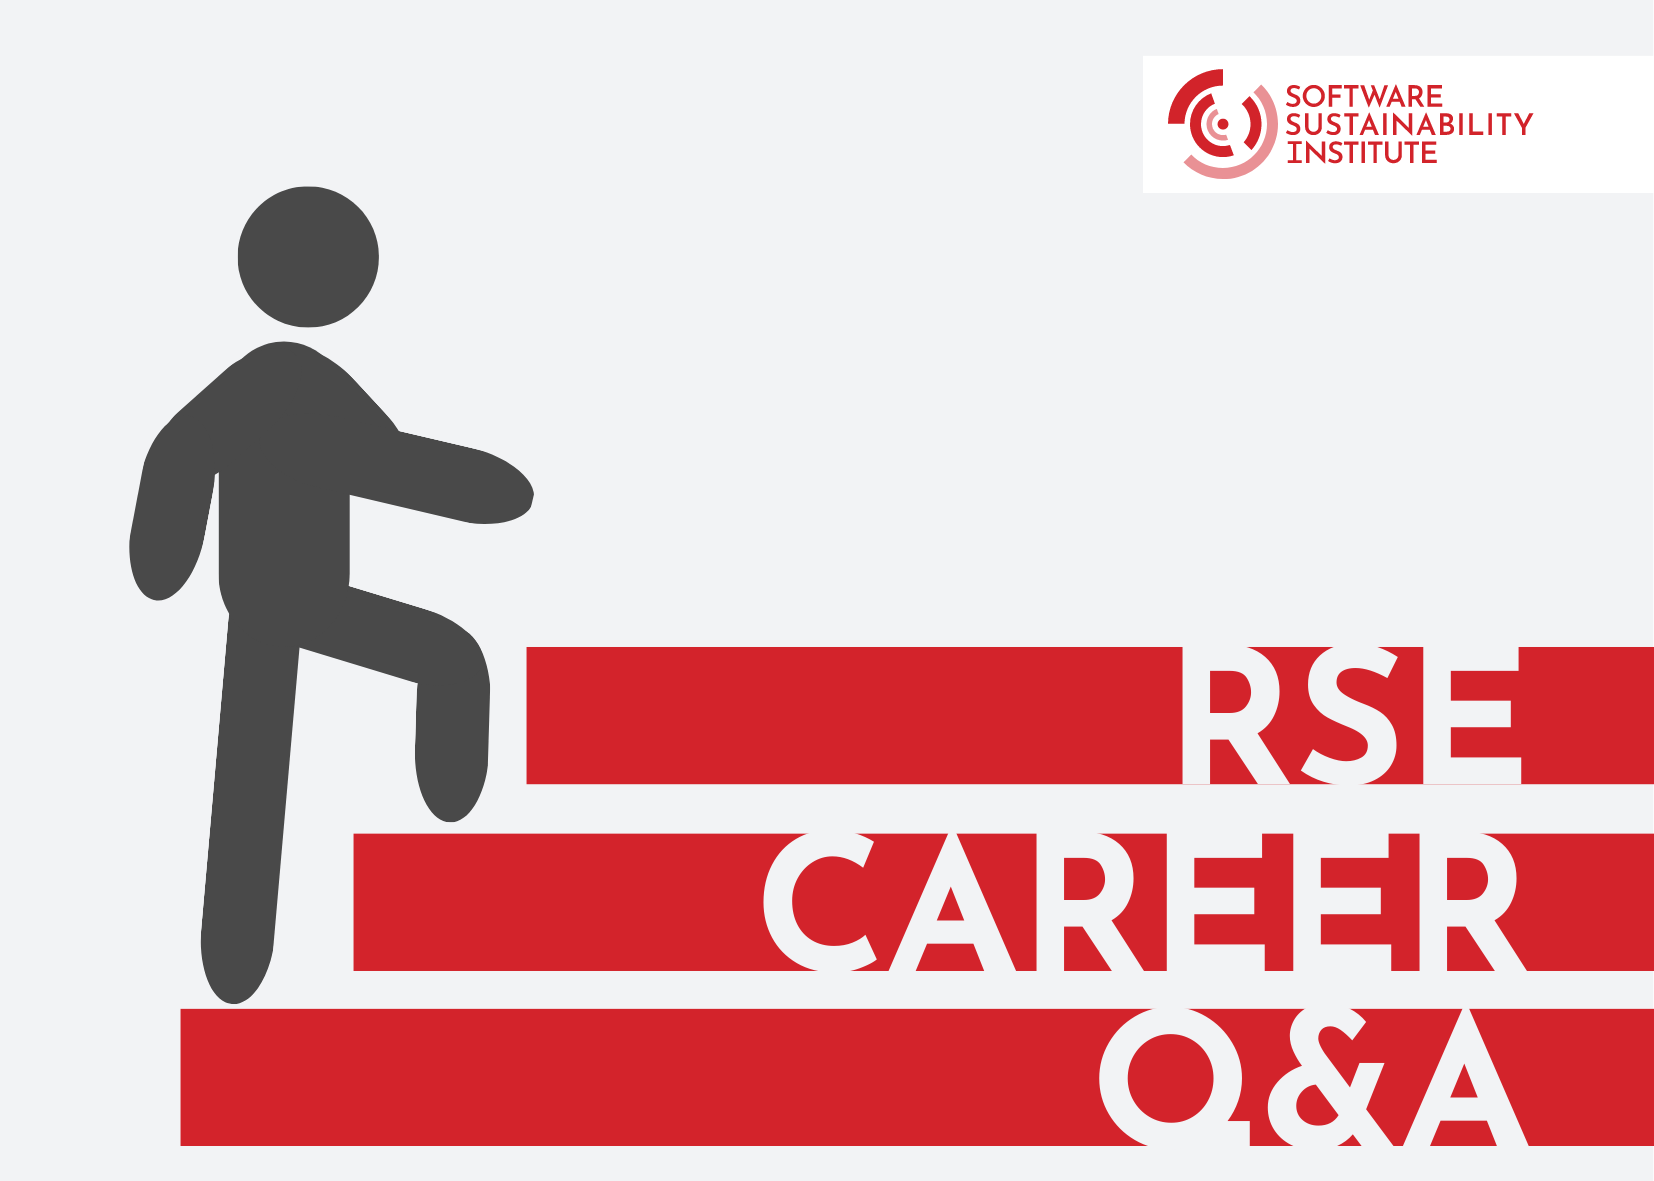 RSE Career Q&A written on the three steps of stair being climbed by a stick figure.